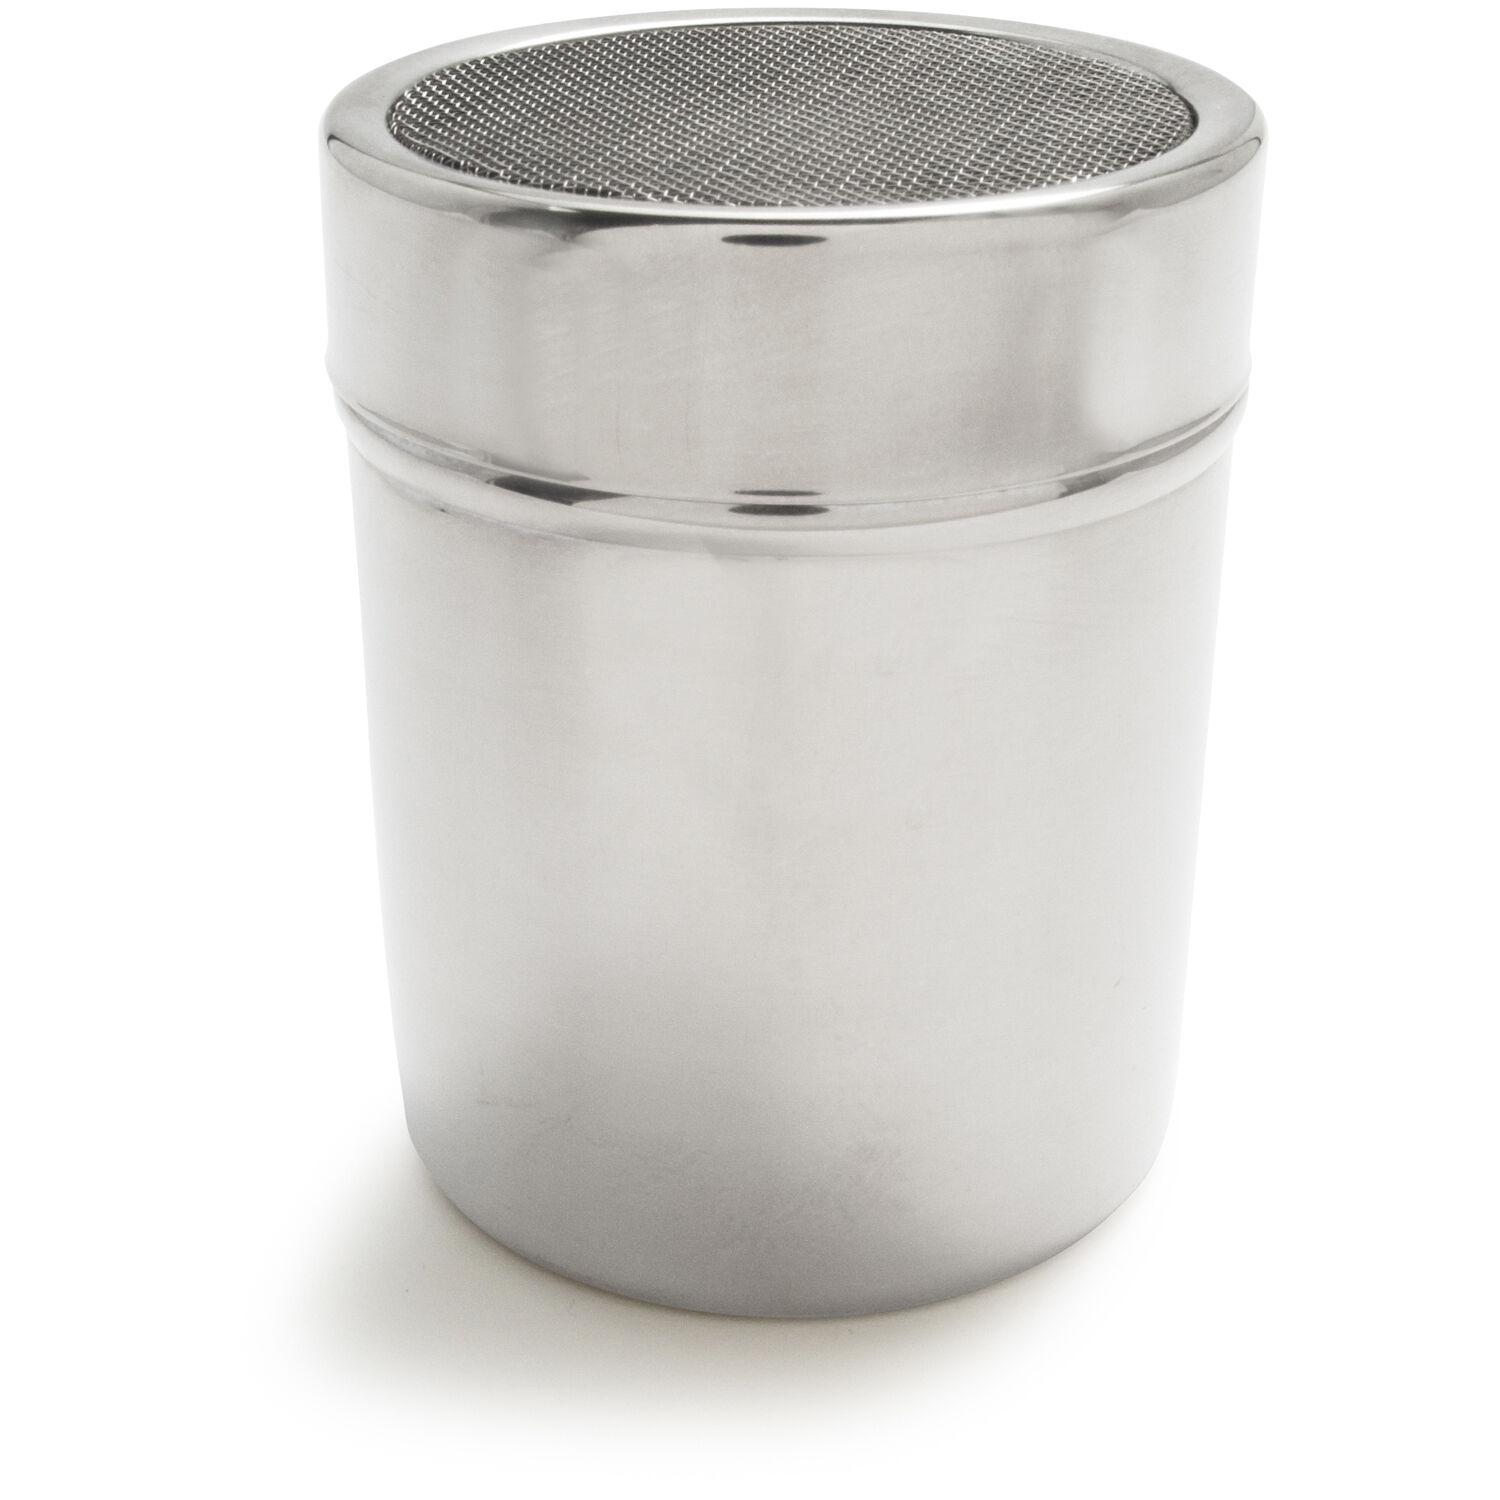 Stainless Steel Dredge Shaker with Lid Stainless Steel Powder Shaker Powder Sugar Coffee Cocoa Shaker Dredges with Fine-Mesh Lid Sprinkler